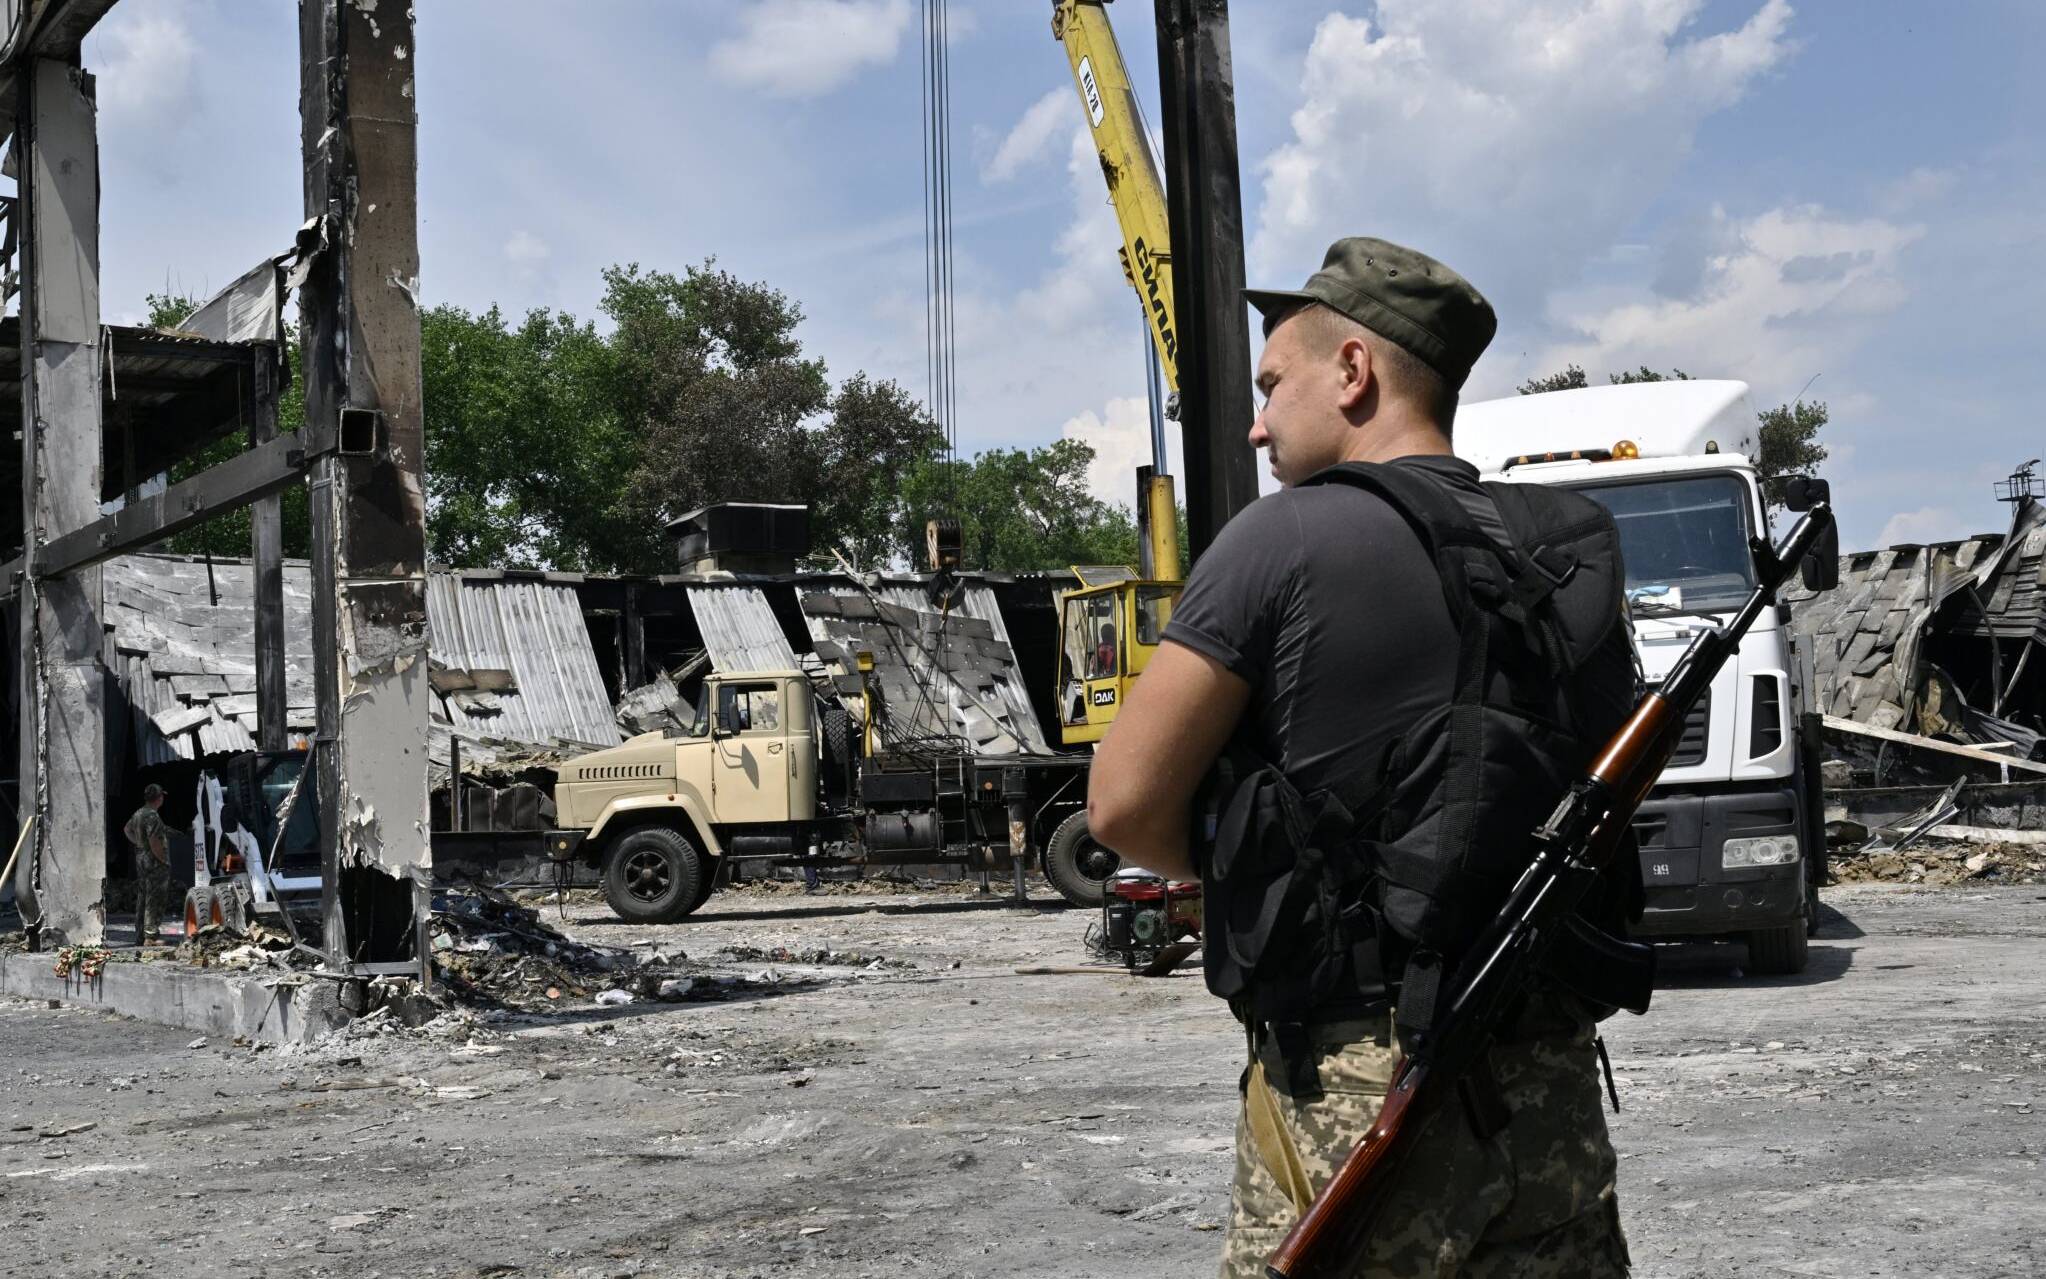 A Ukrainian serviceman stands alert as workers clear rubble and debris from The Amstor Mall in Kremenchuk, on June 29, 2022, two days after it was hit by a Russian missile strike according to Ukrainian authorities. - A missile strike on a crowded mall in Kremenchuk, central Ukraine killed at least 18 people. (Photo by Genya SAVILOV / AFP)